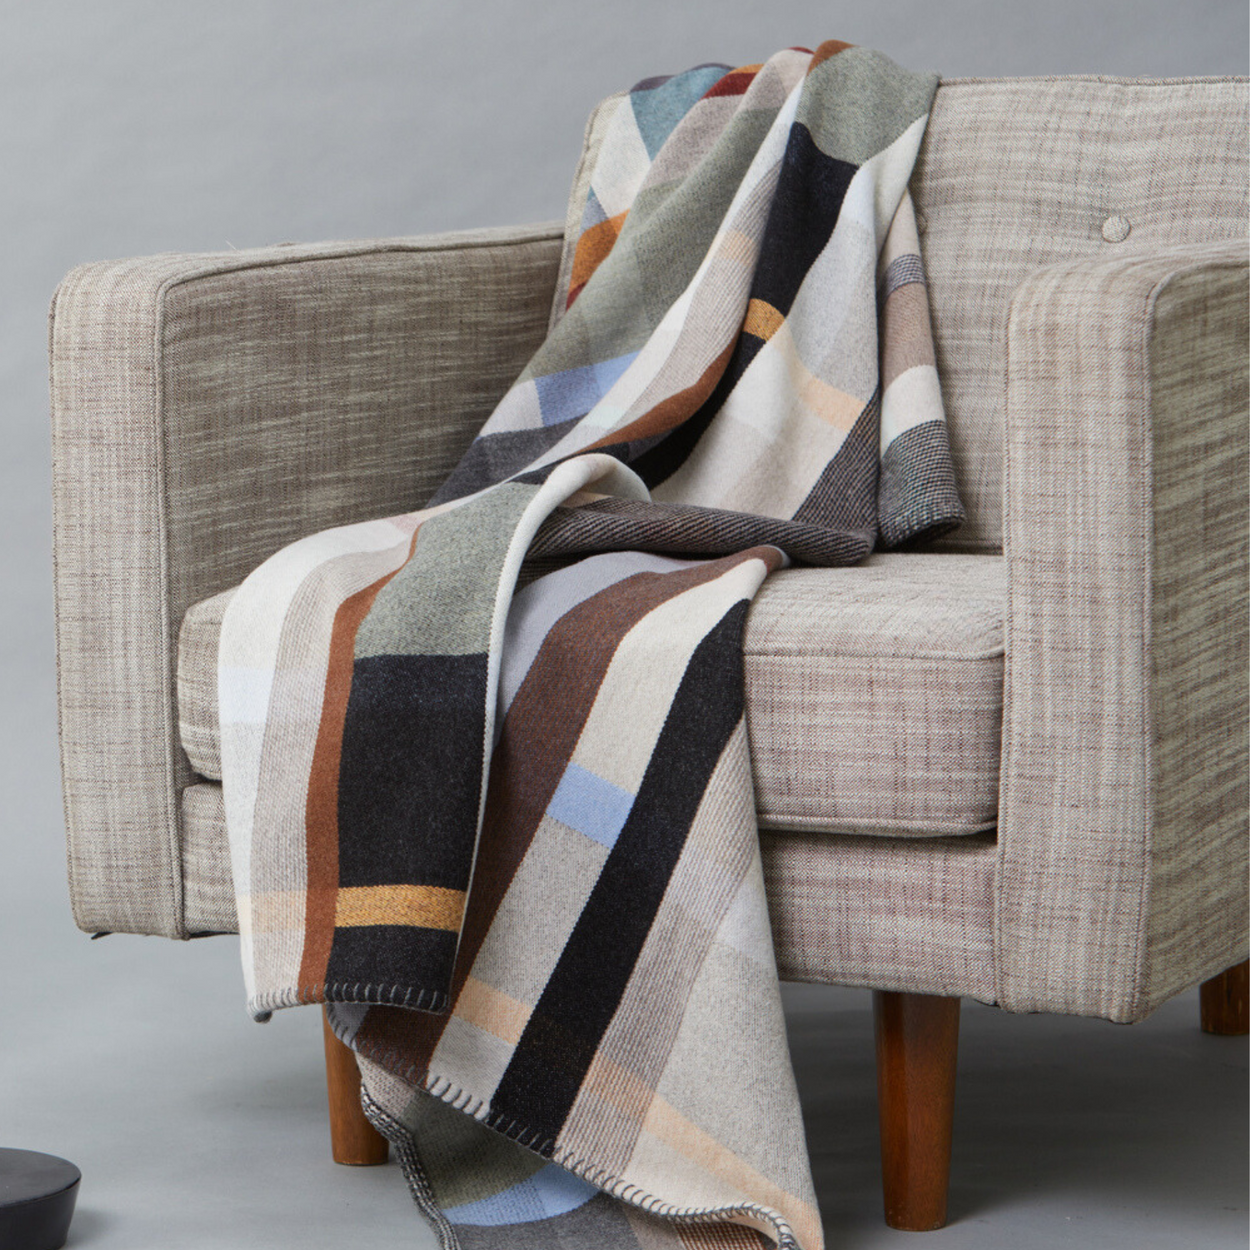 Wallace Sewell Premium Chipperfield  Merino lambswool throw in pale brown tones, draped on arm chair.